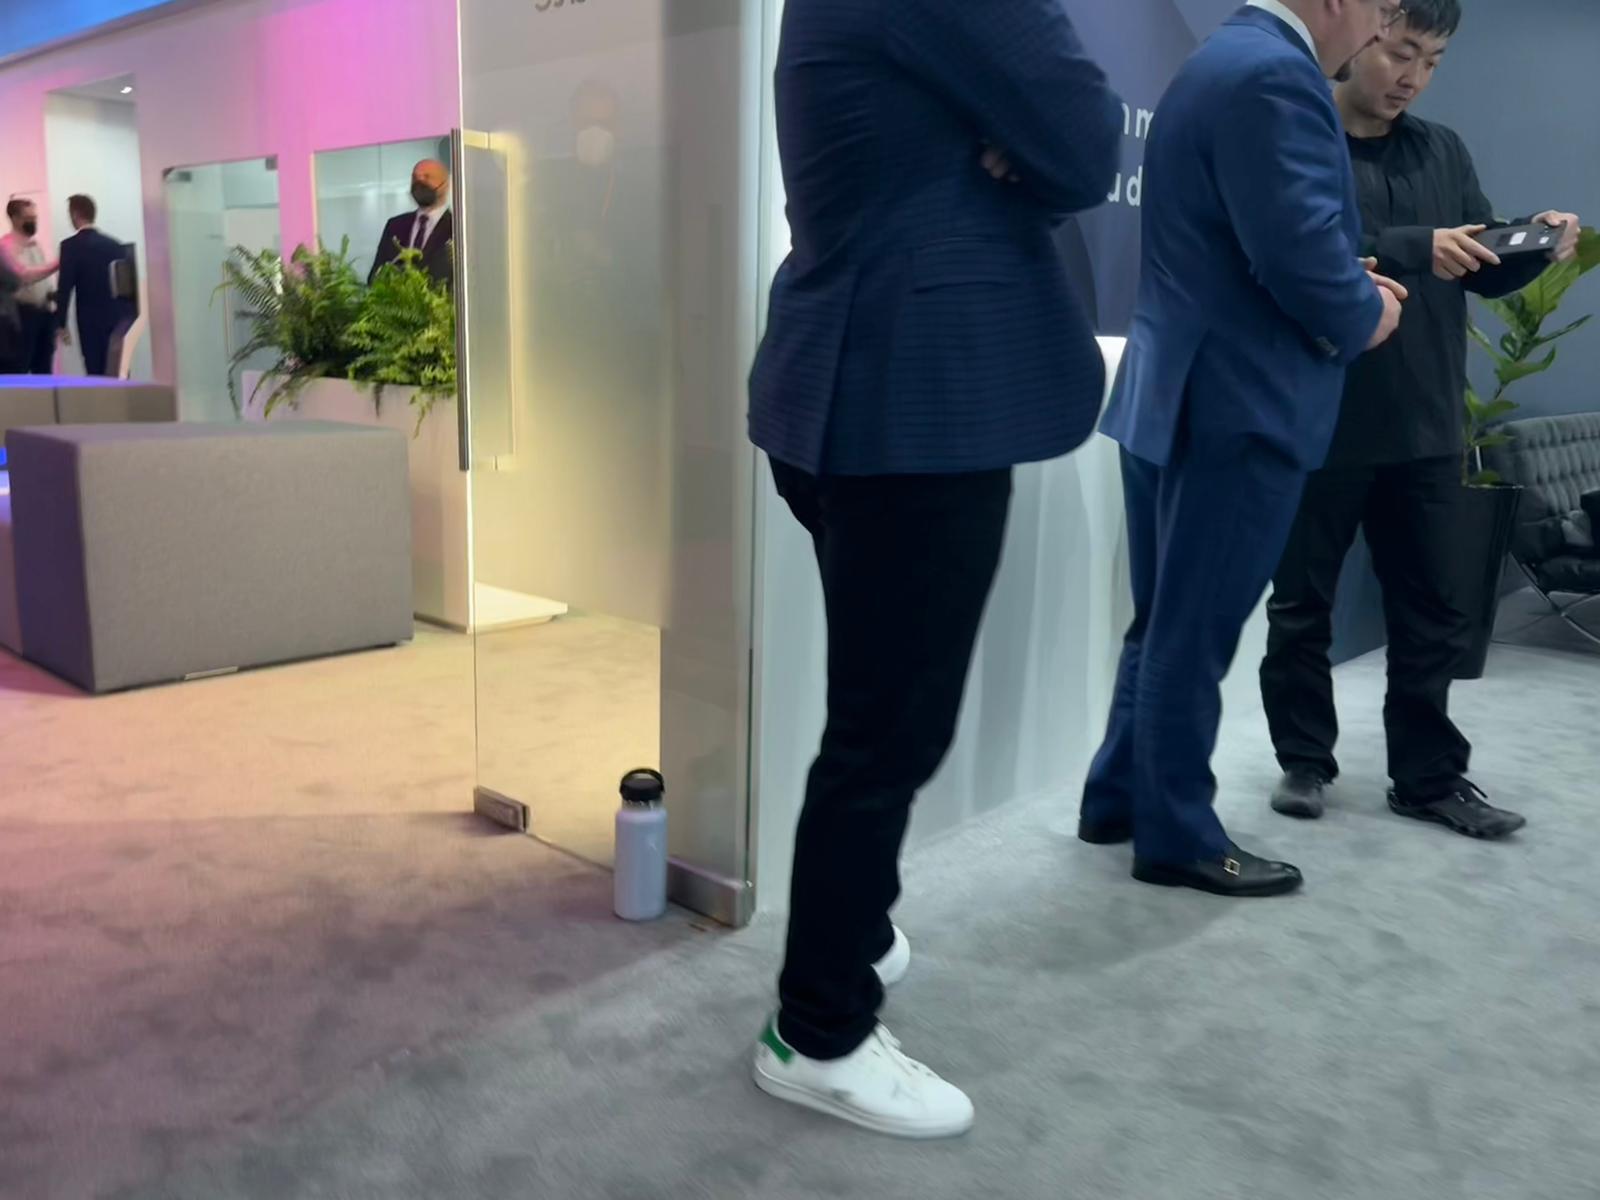 Nothing founder and CEO Carl Pei shows off what could be the rumored Nothing phone to Qualcomm CEO Cristiano Amon at MWC - Nothing to show off its new product roadmap, possibly including a phone, on March 23rd